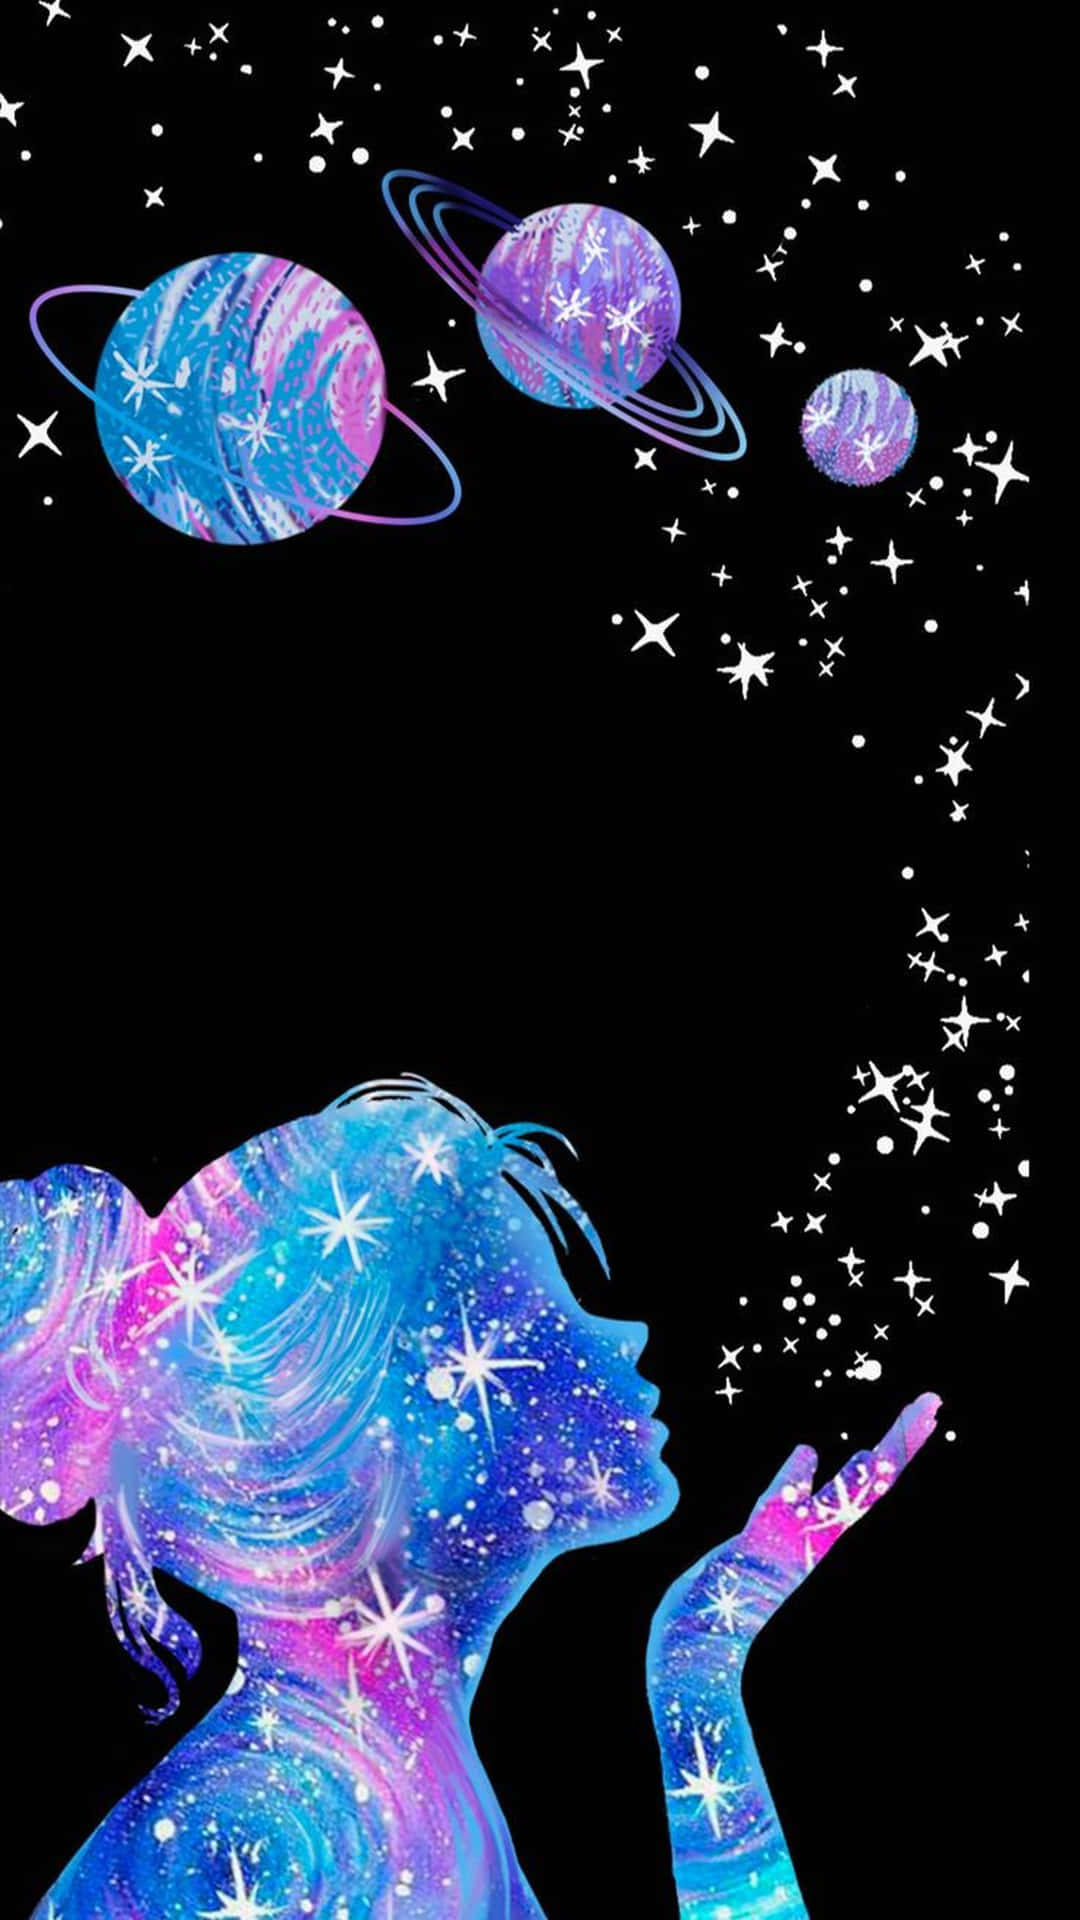 Free Vector  Galaxy iphone wallpaper mobile background cute space vector